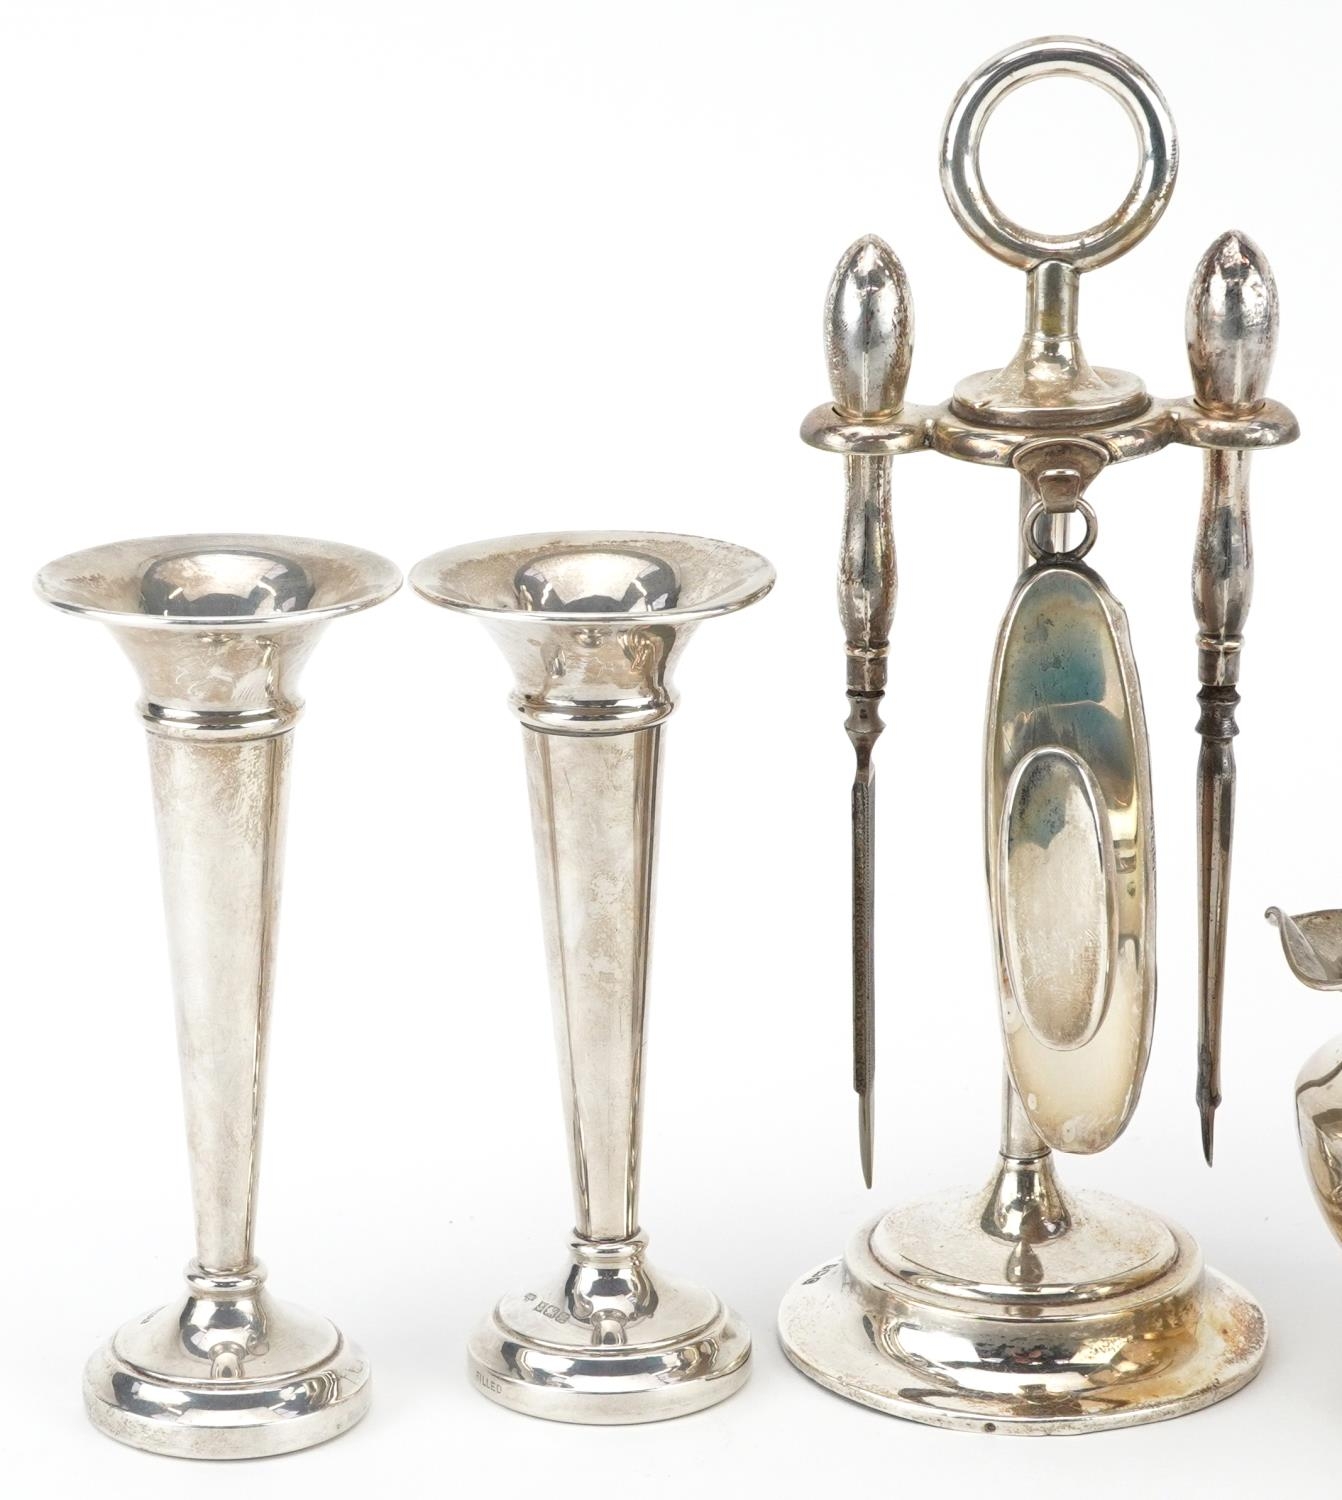 Edwardian and later silver including vanity tools on stand, pair of miniature trumpet shaped vases - Image 2 of 7